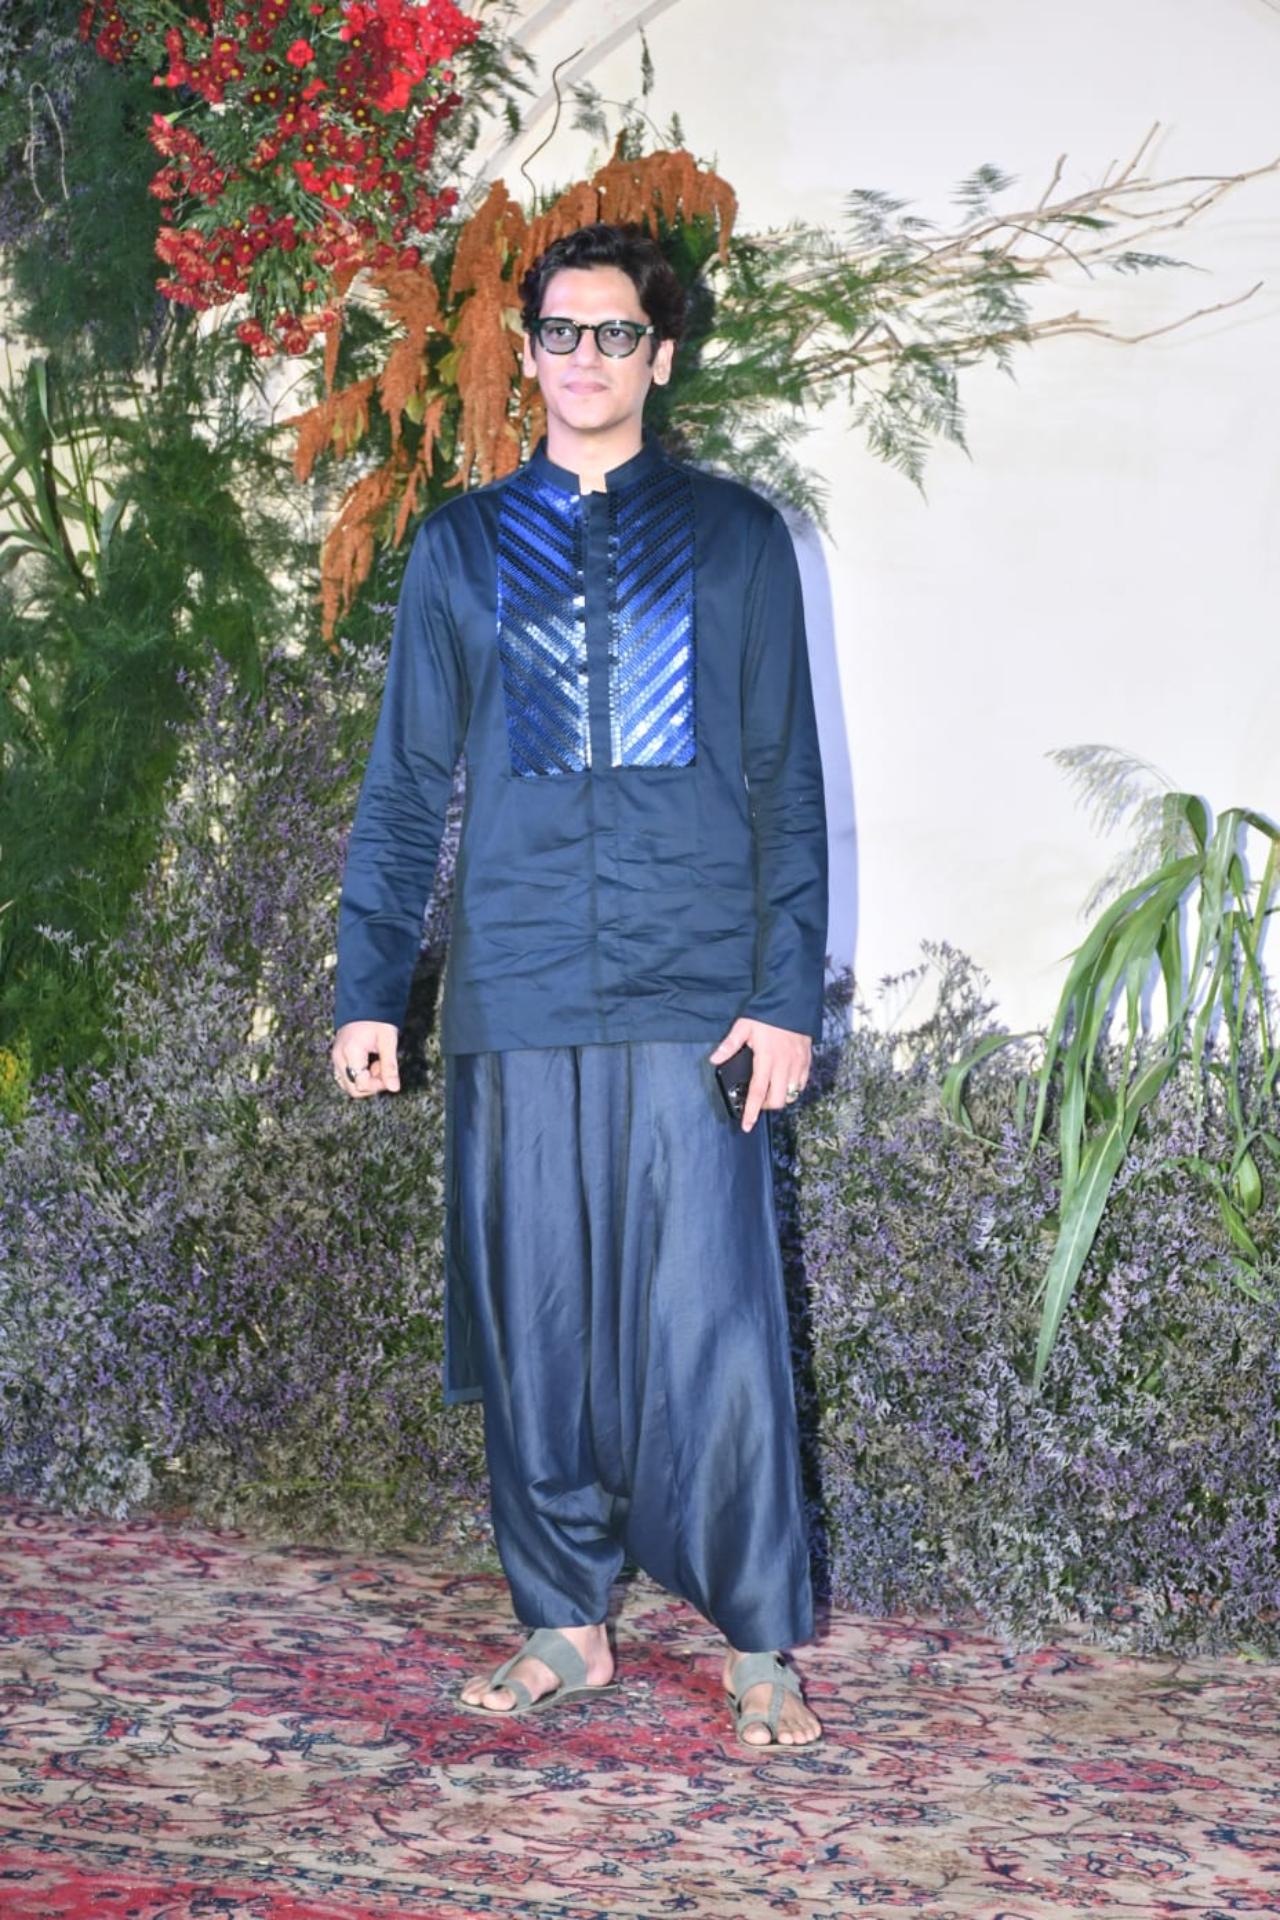 Actor Vijay Varma went for an all-blue shiny traditional ensemble. The 'Darlings' actor completed his look with a pair of shades